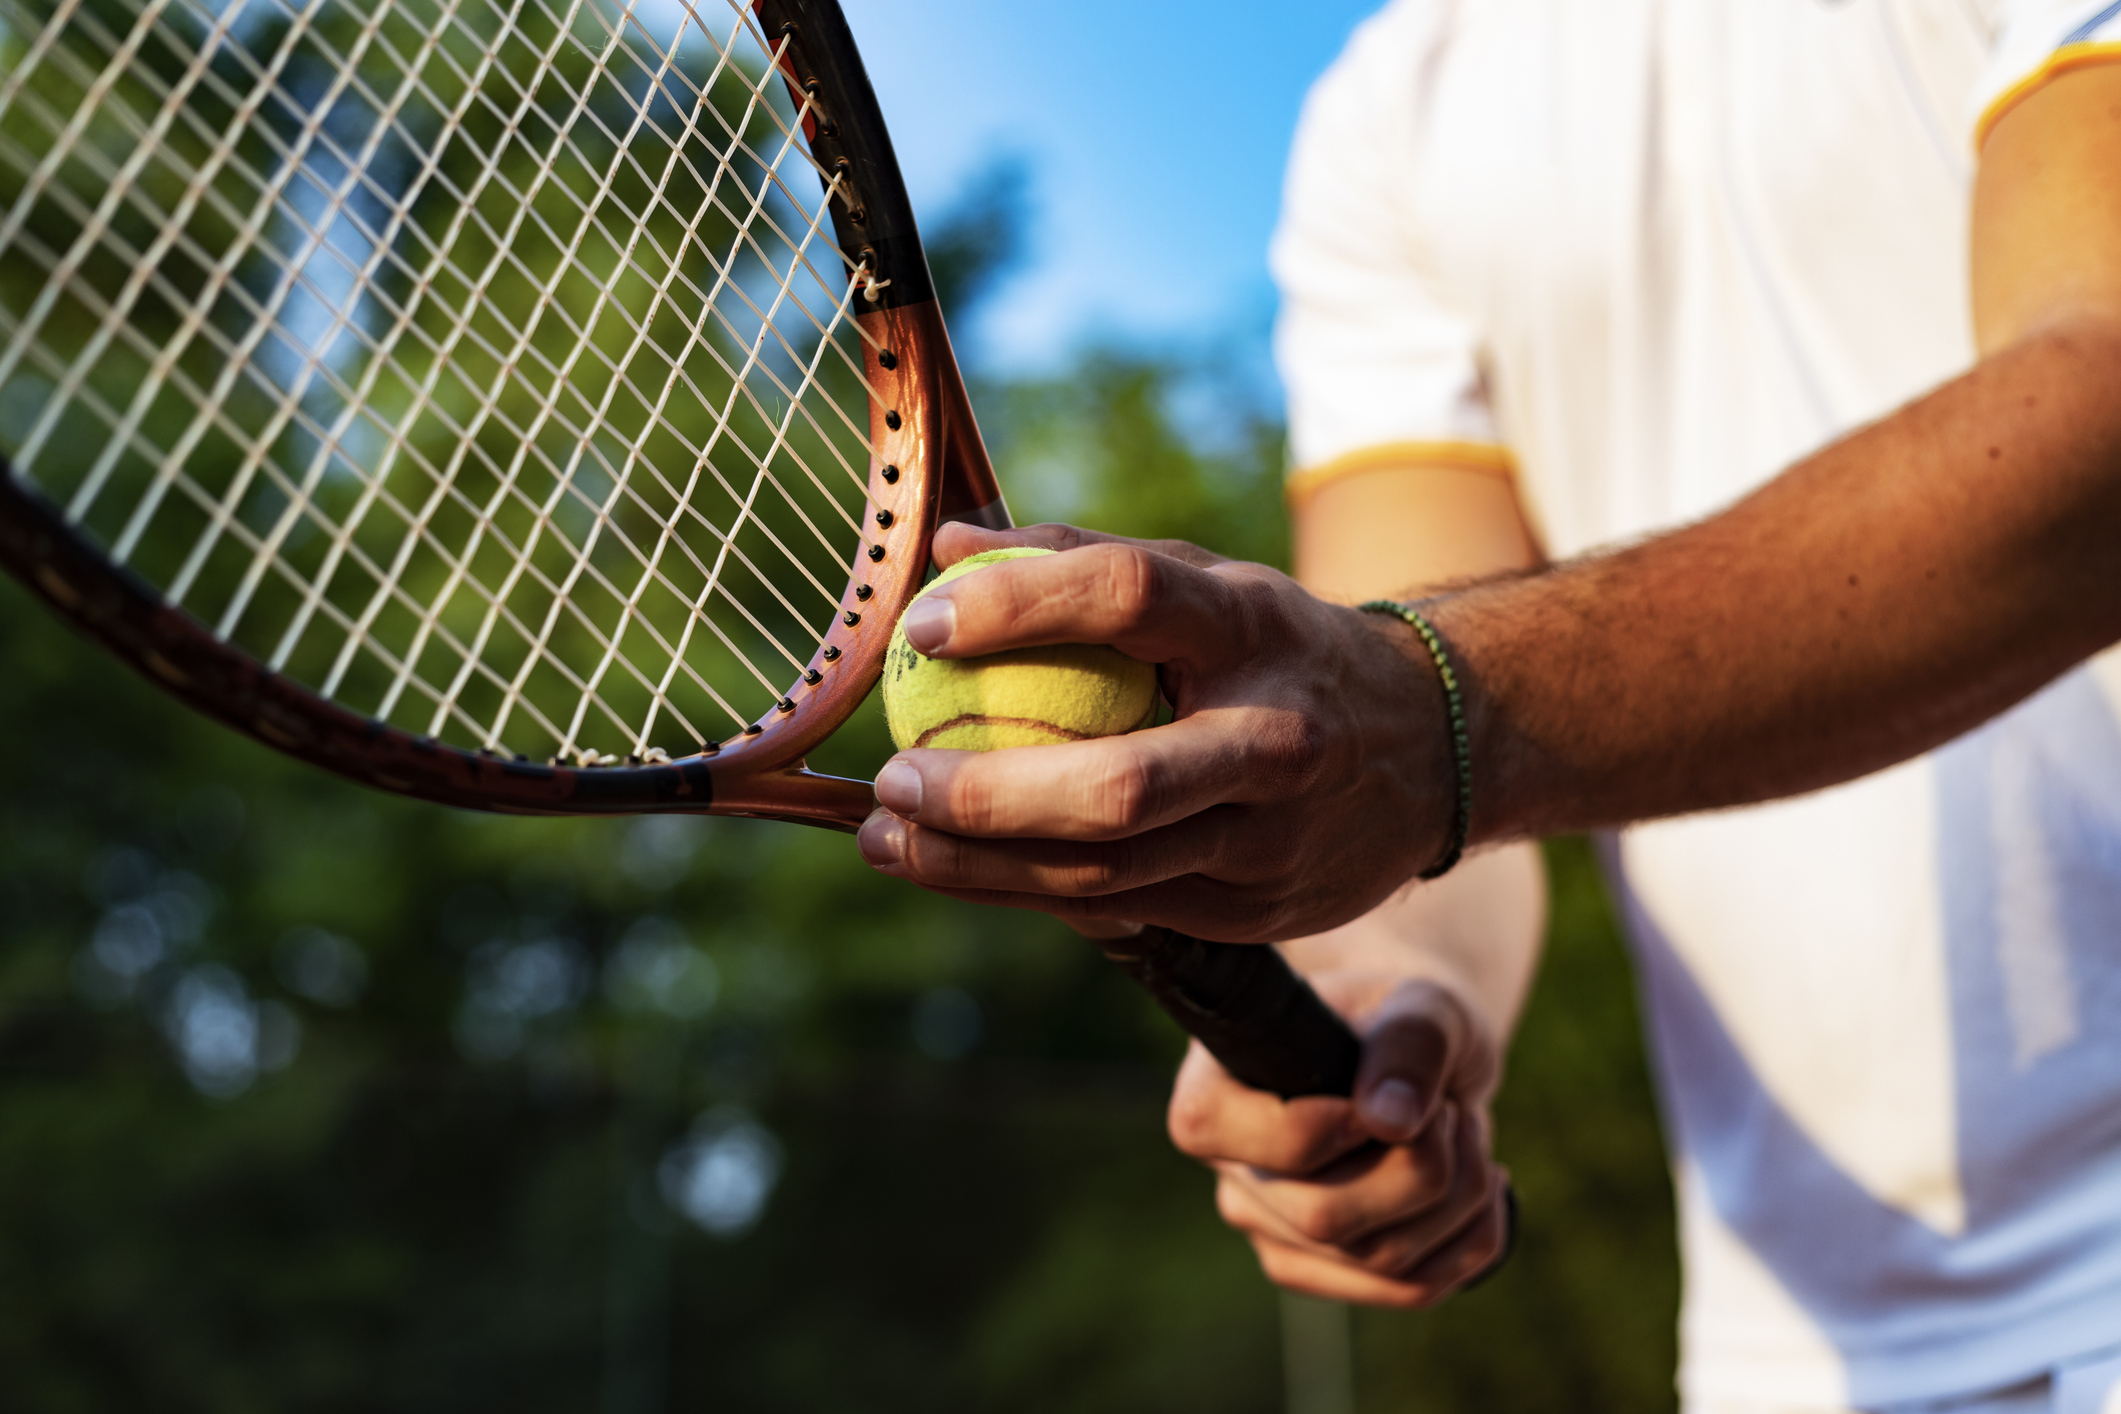 Tennis Injuries Present Top Players with Serious Challenges - The